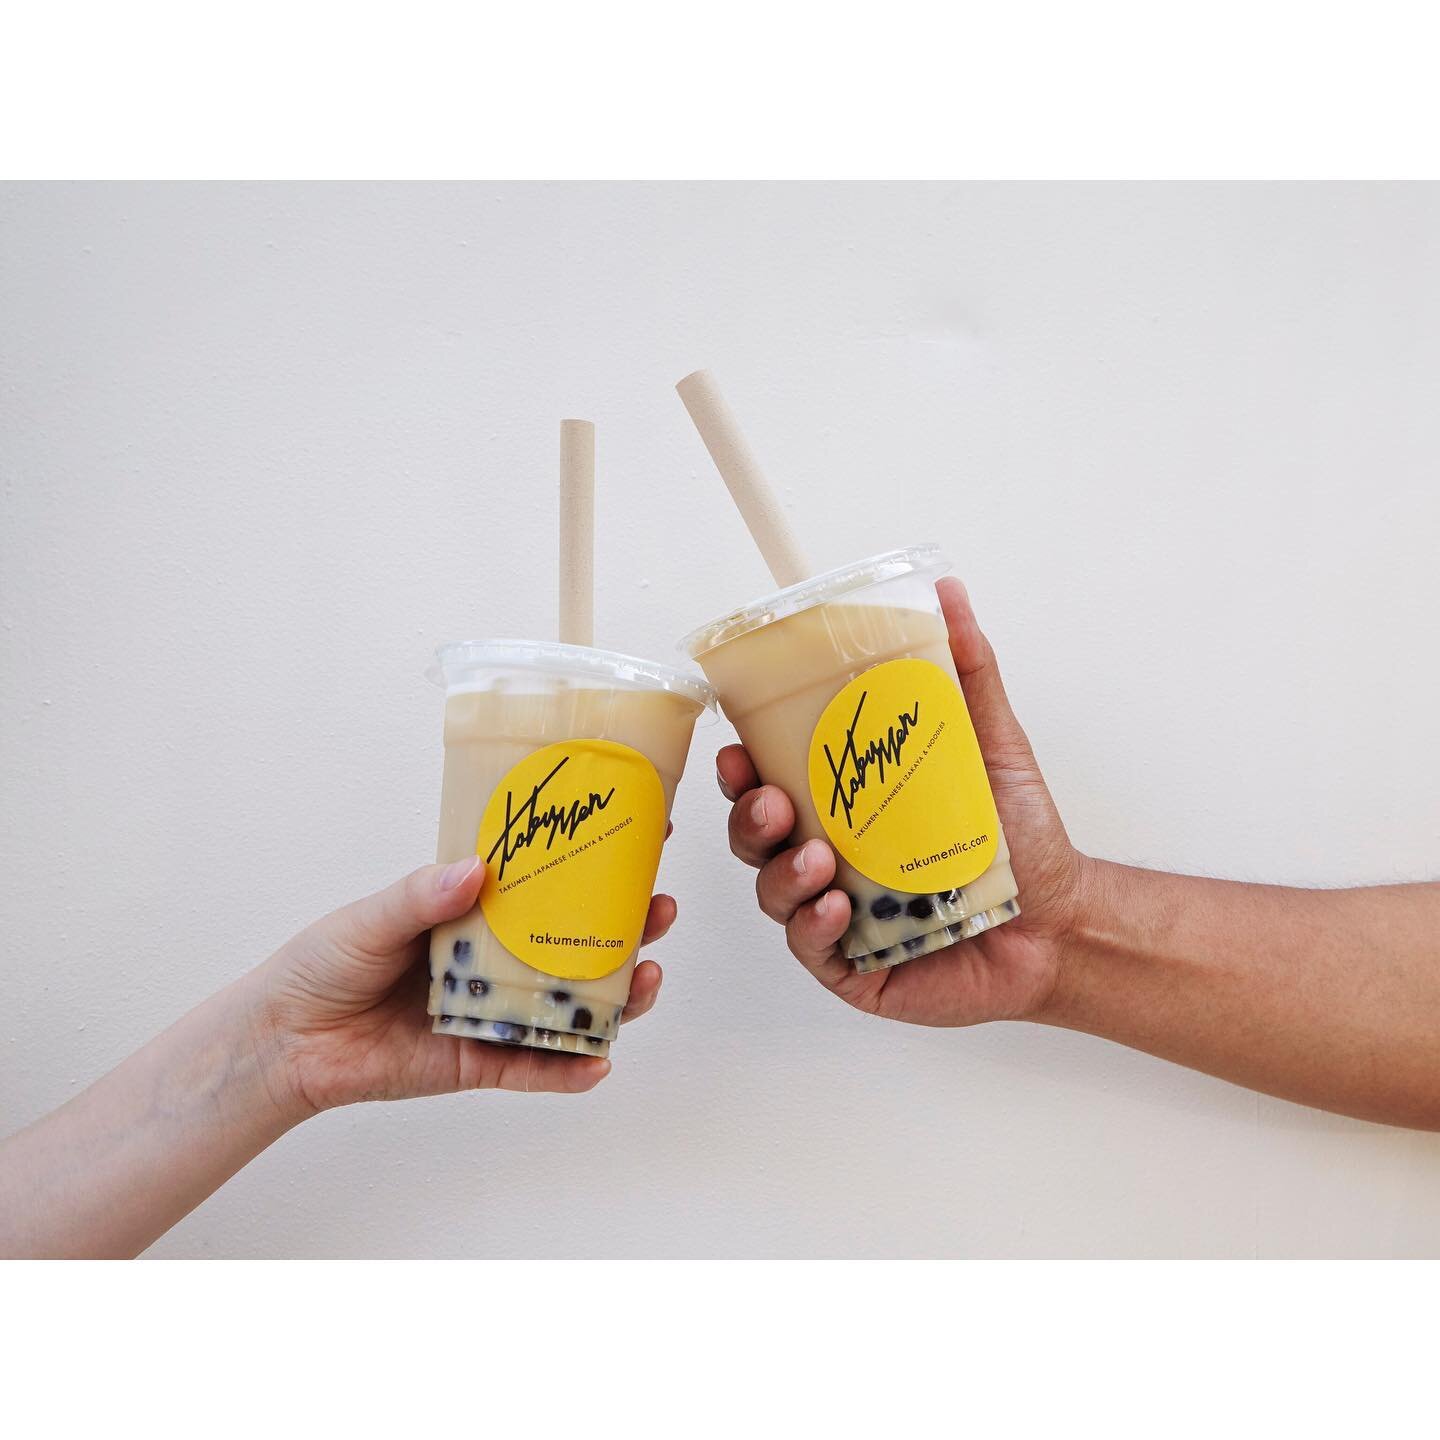 BUBBLE TEA
Happy Monday! Grab some bubble tea for your afternoon pick me up. Our bubble tea is lightly sweetened, so you can drink it everyday (well...maybe 5 times a week😉)

#bubbletea #matcha #hojicha

Now we&rsquo;re serving a full menu for our o